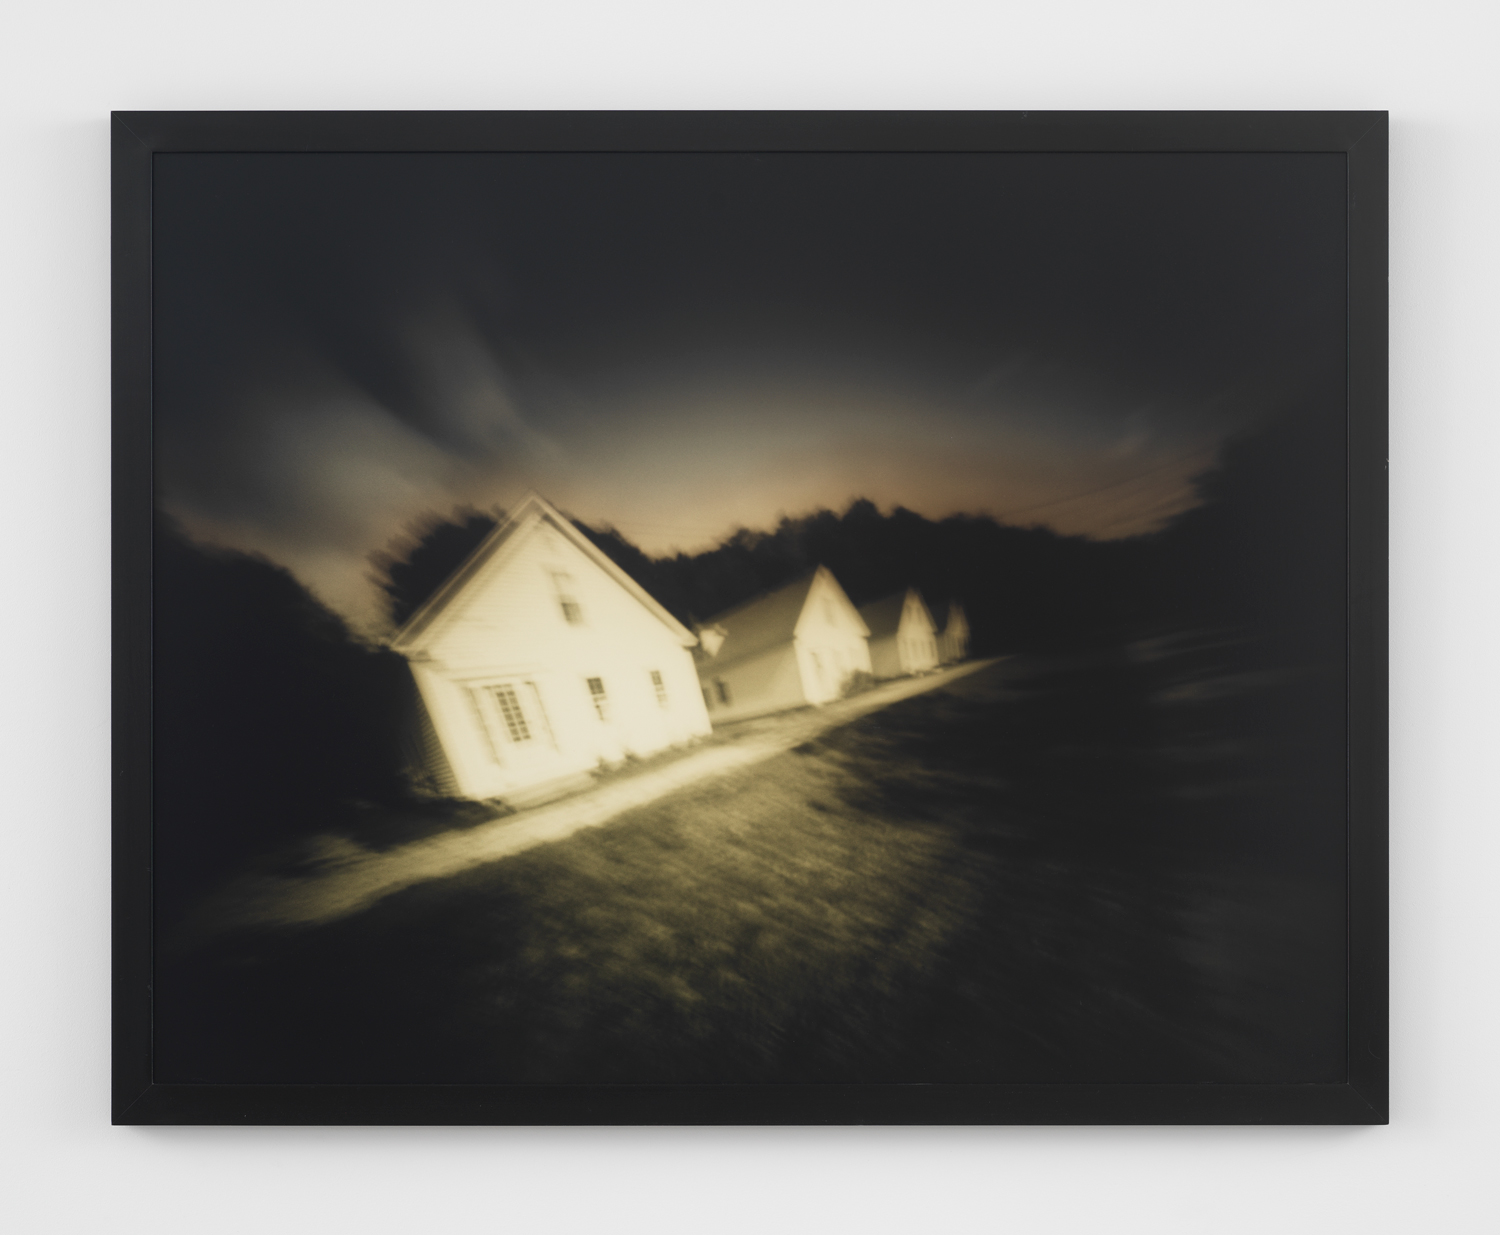 Barbara Ess, No Title (Row of Houses), 1997-98, C-Print, 43 1/8 x 54 5/8 x 1 3/4 in.